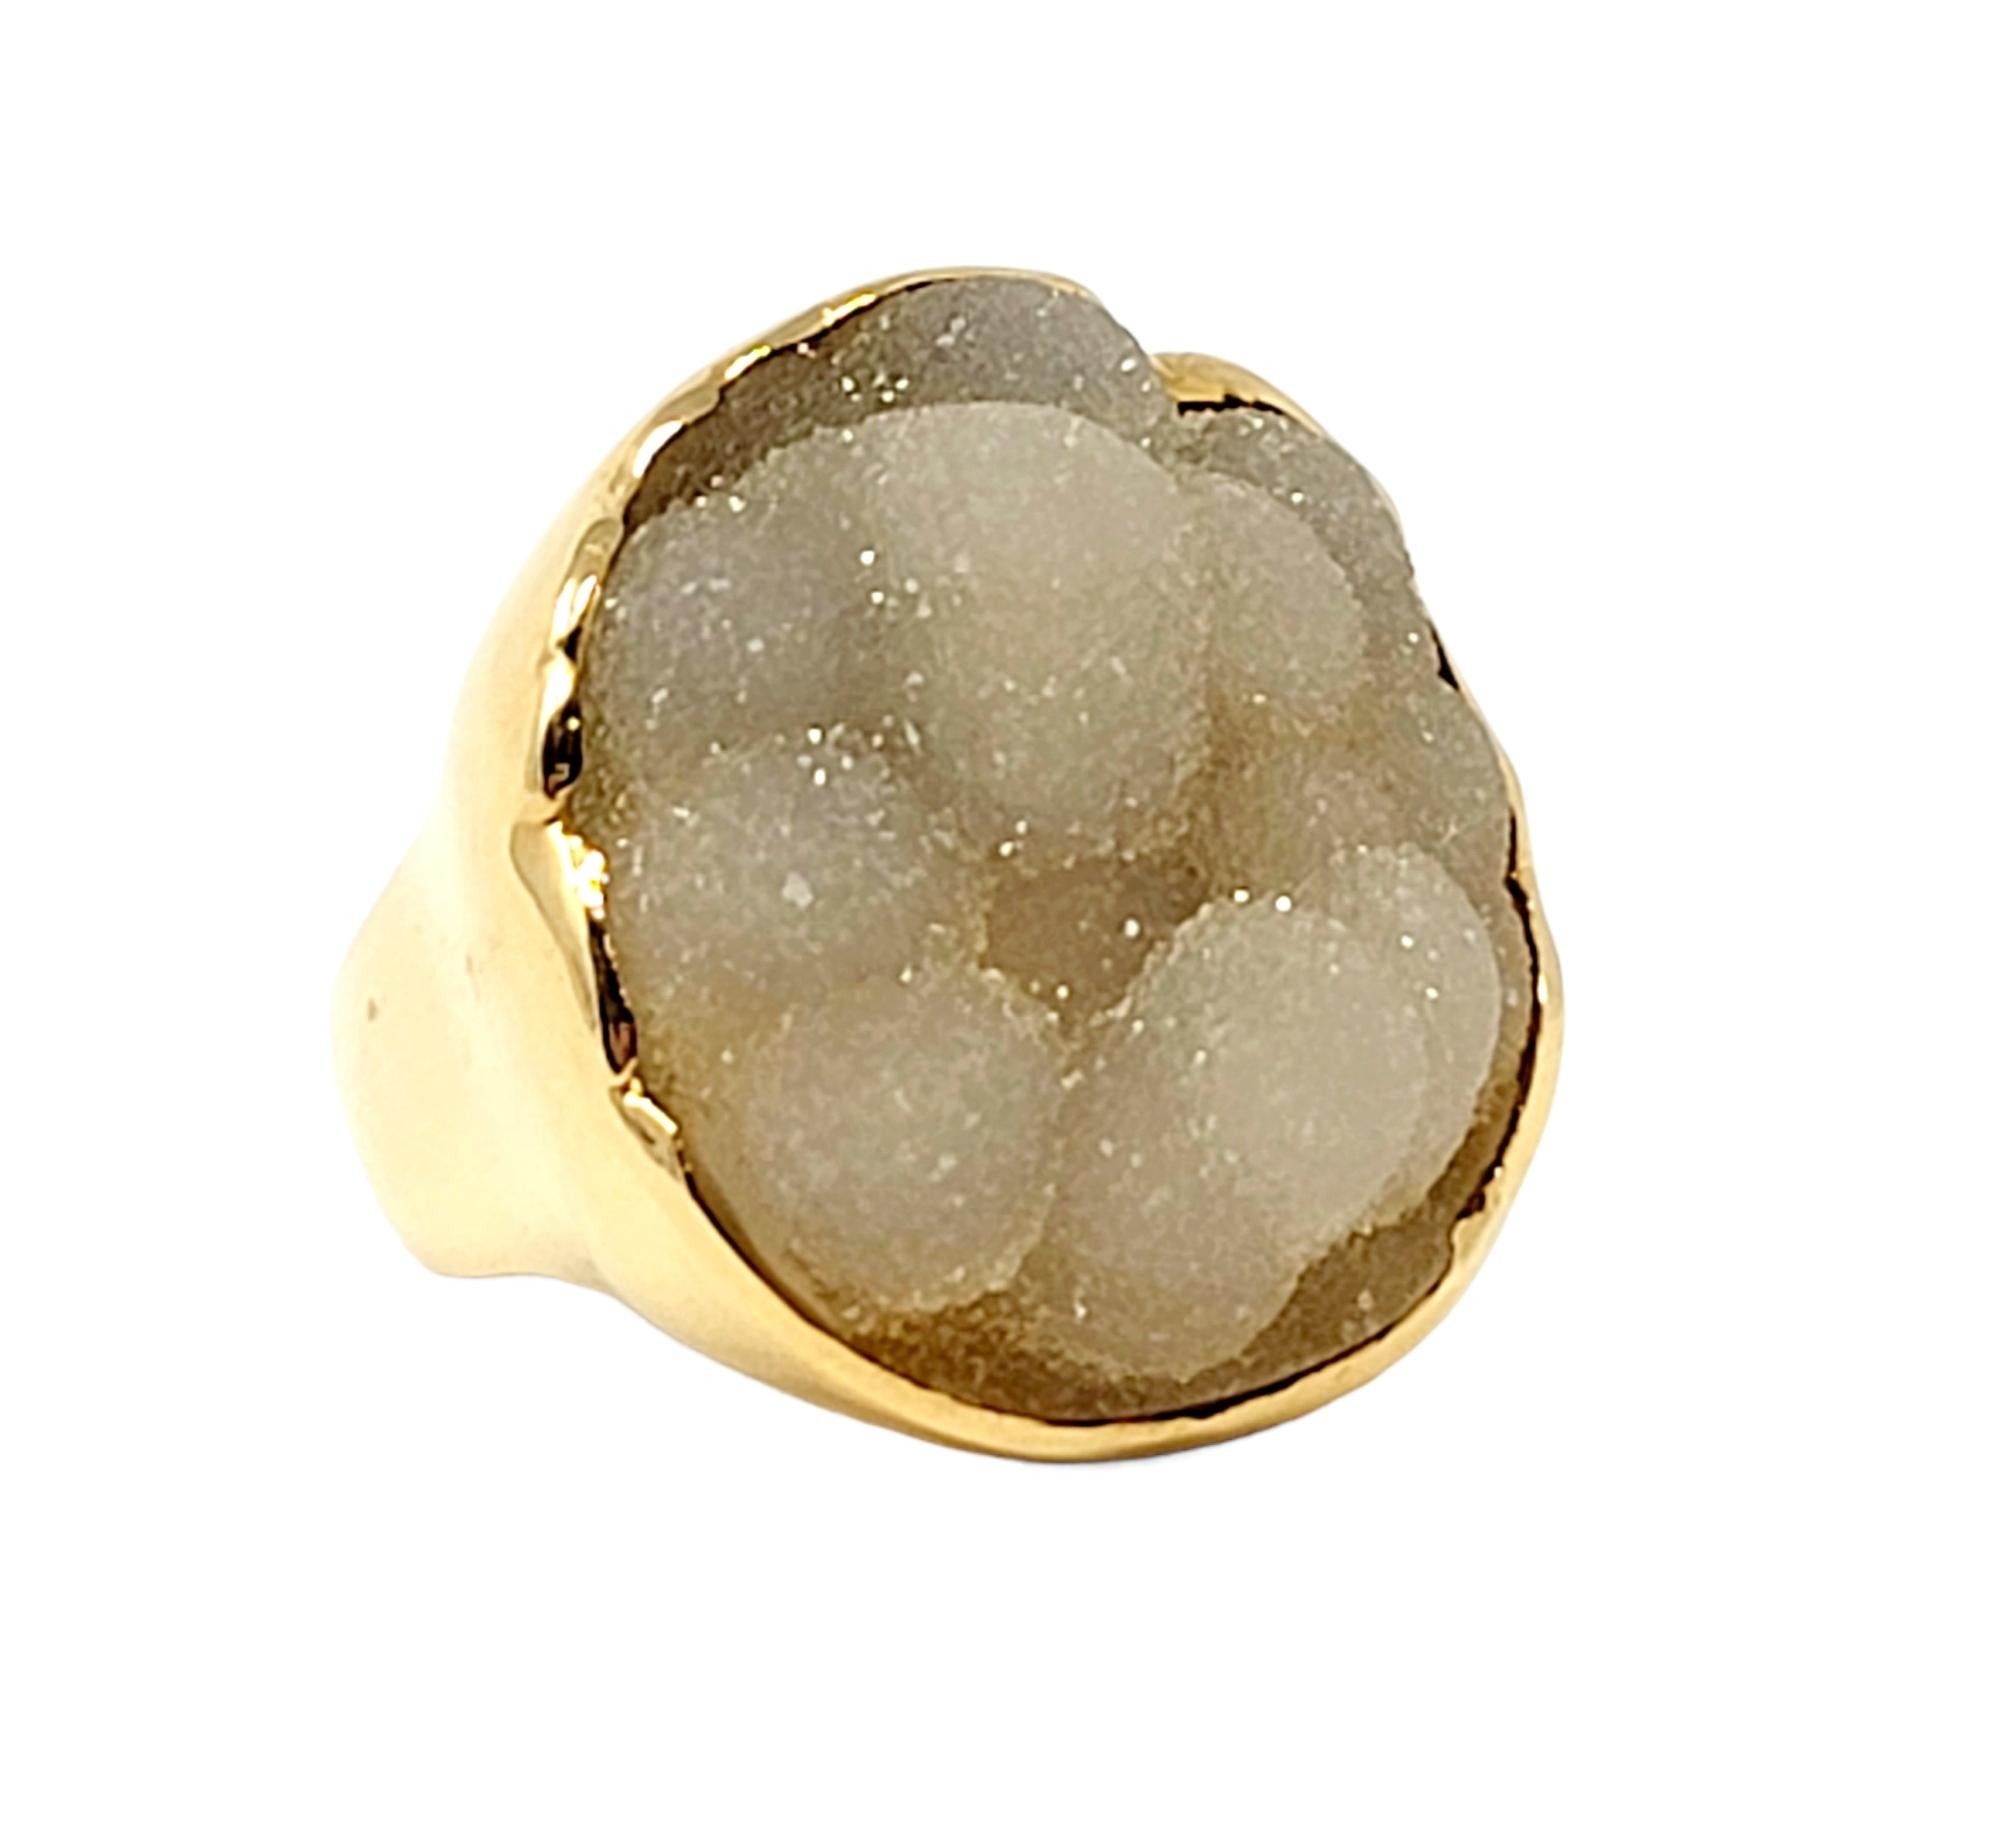 Ring size: 6.75

This huge natural agate cocktail ring makes an absolutely sensational statement. Substantial in both size and design, this ring will not go unnoticed! The center of the piece features a large, rough cut cluster of botryoidal agate